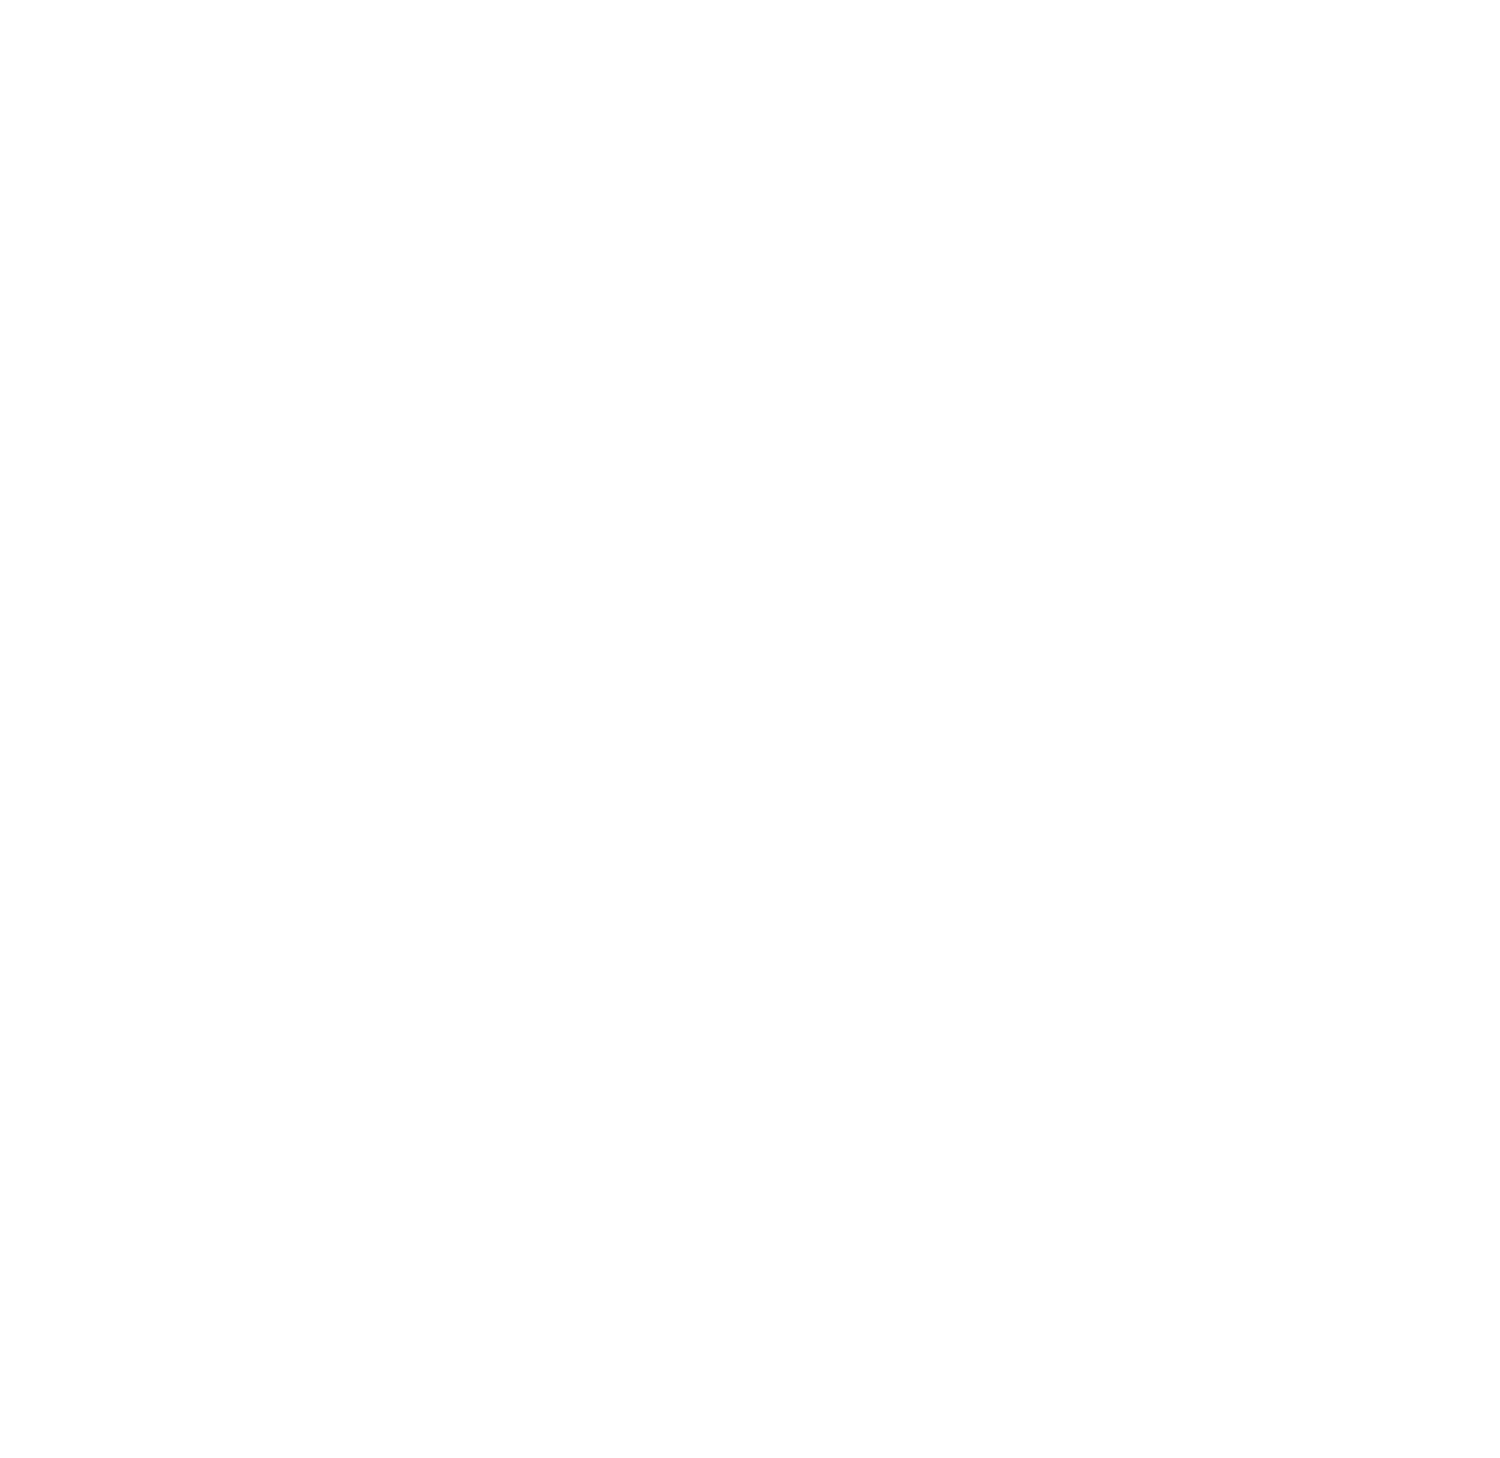 Andean Center for Latin American Studies